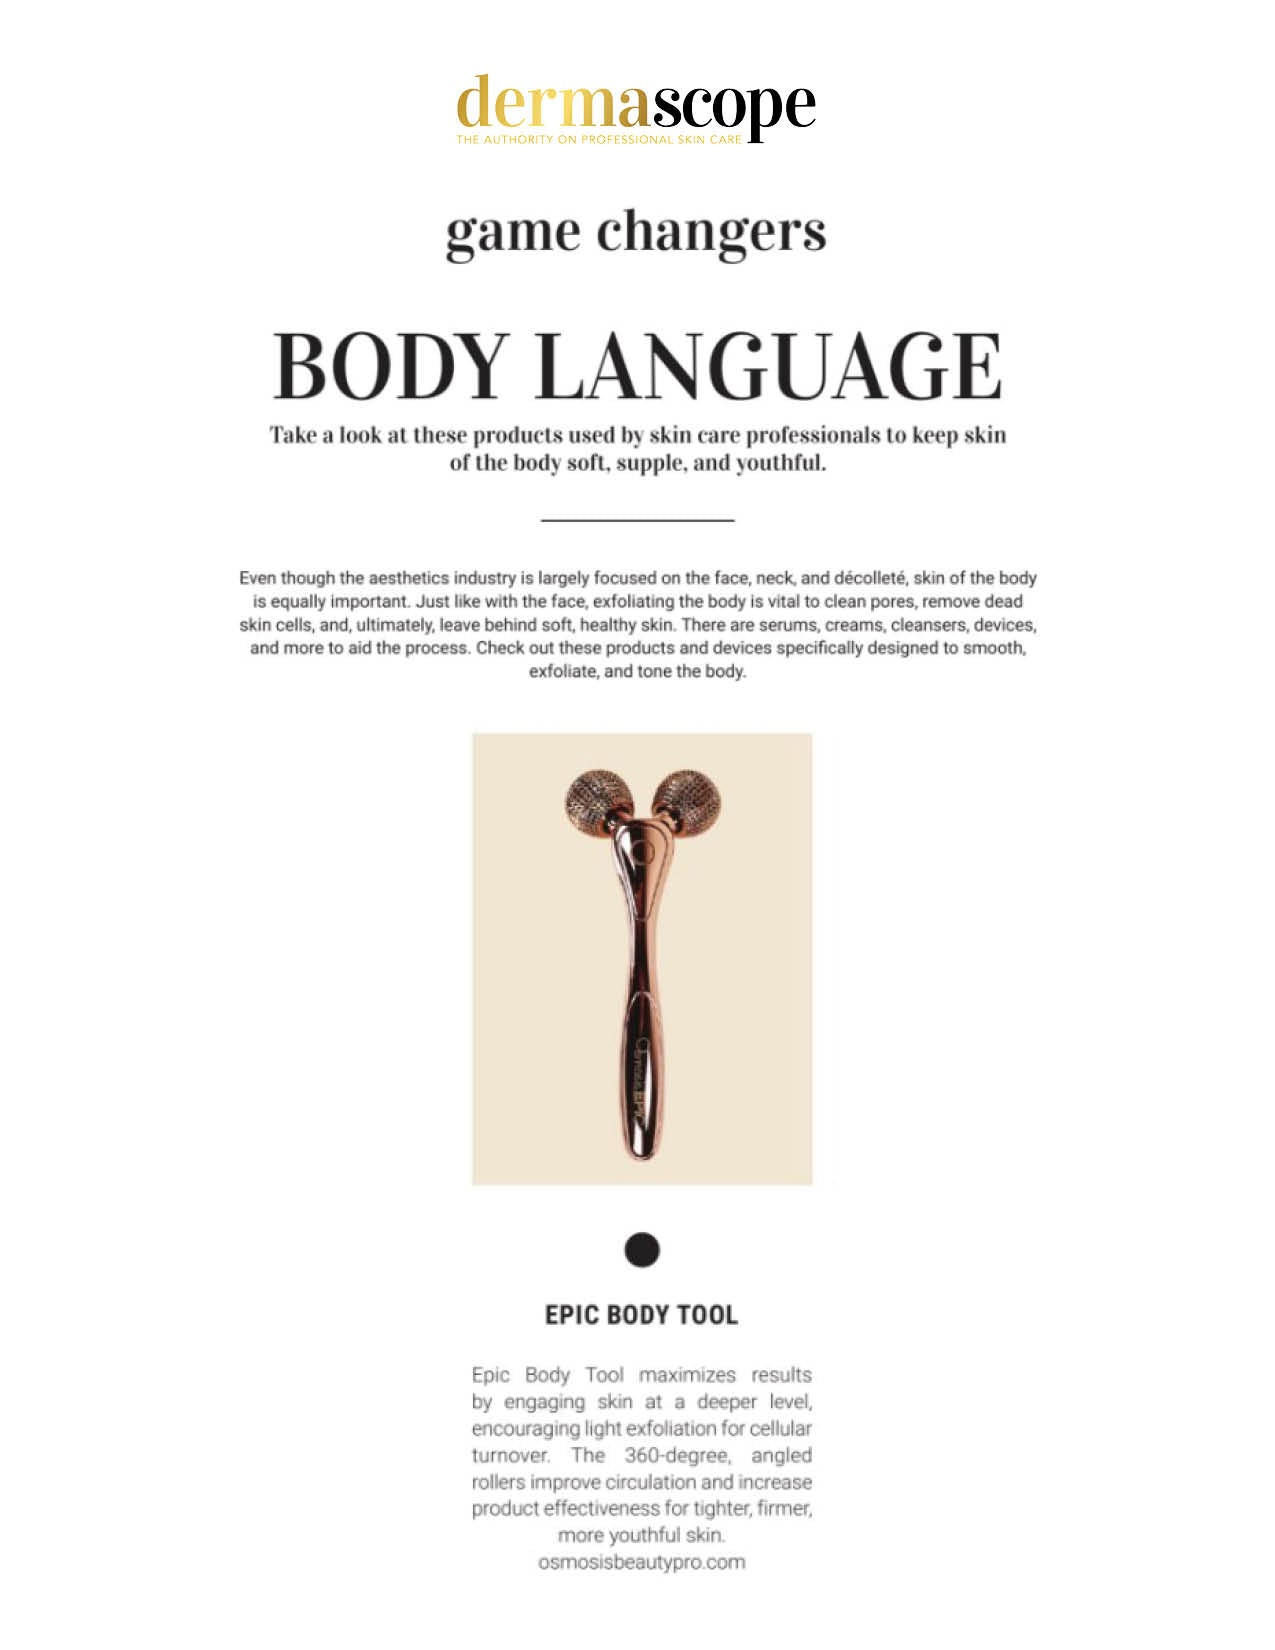 Dermascope featured the EPIC Body Tool in their April issue